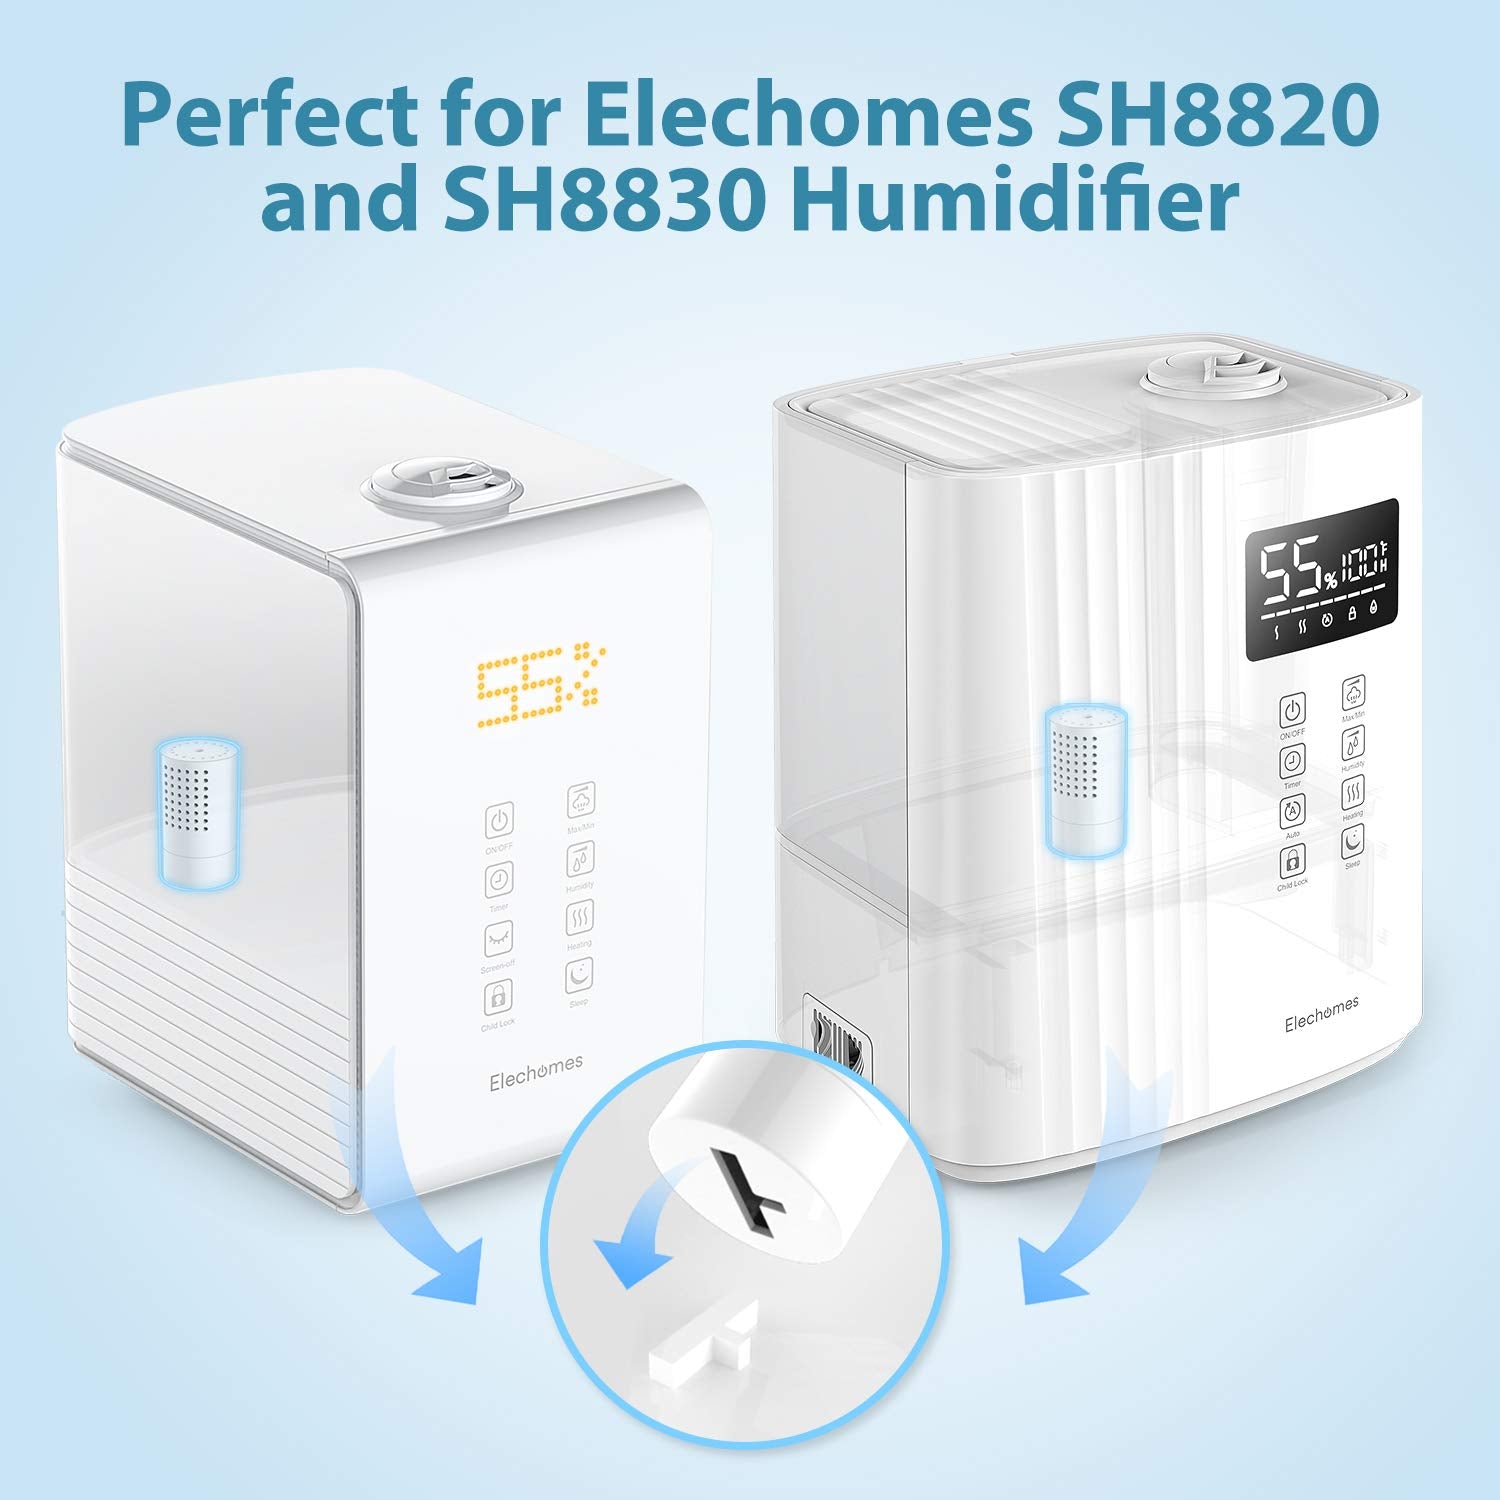 Elechomes Humidifier Filter for SH8820 Humidifiers, Works for Other Brands As Well